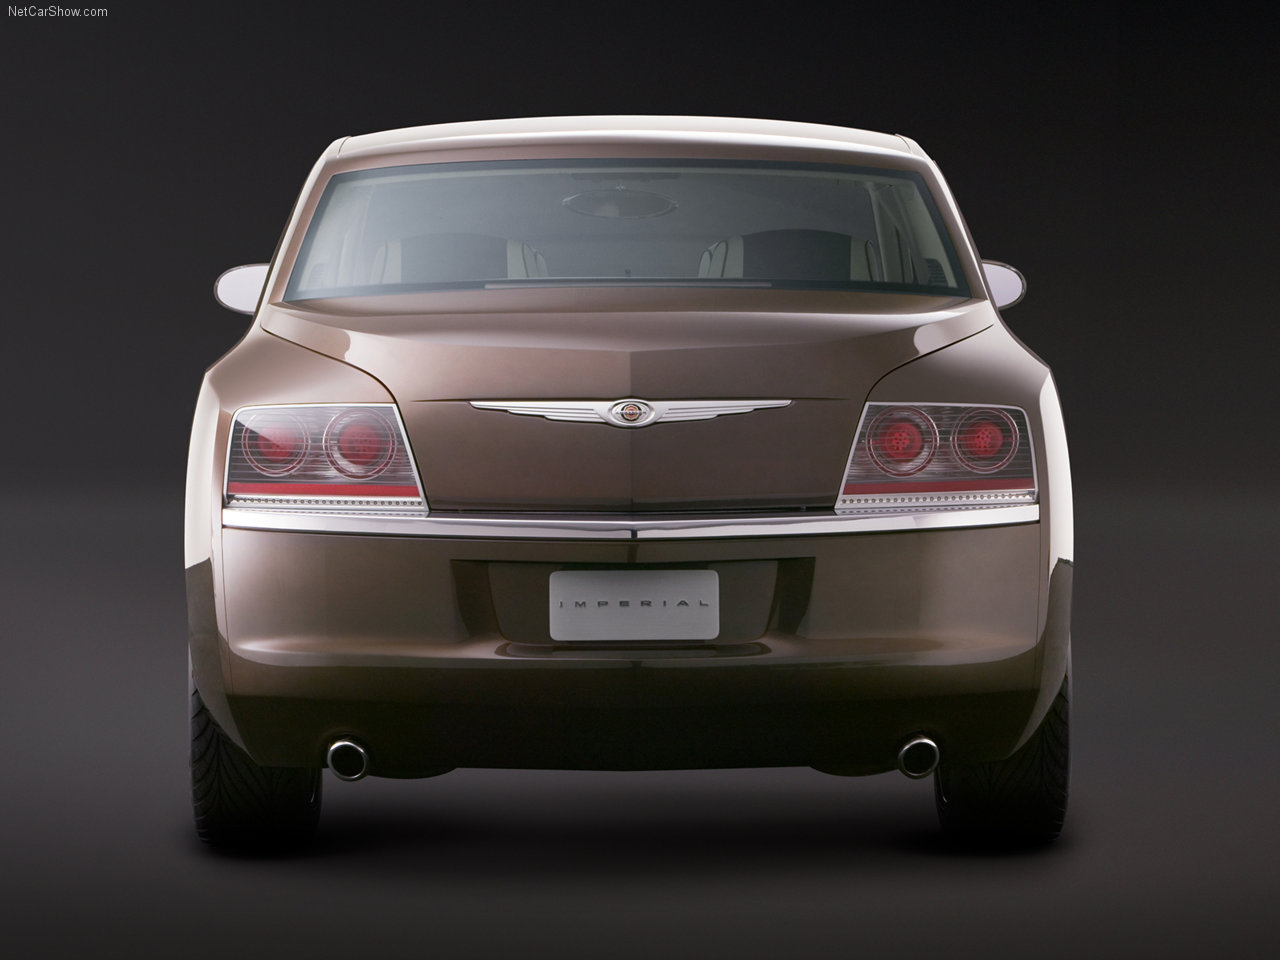 2006 Chrysler imperial picture #4